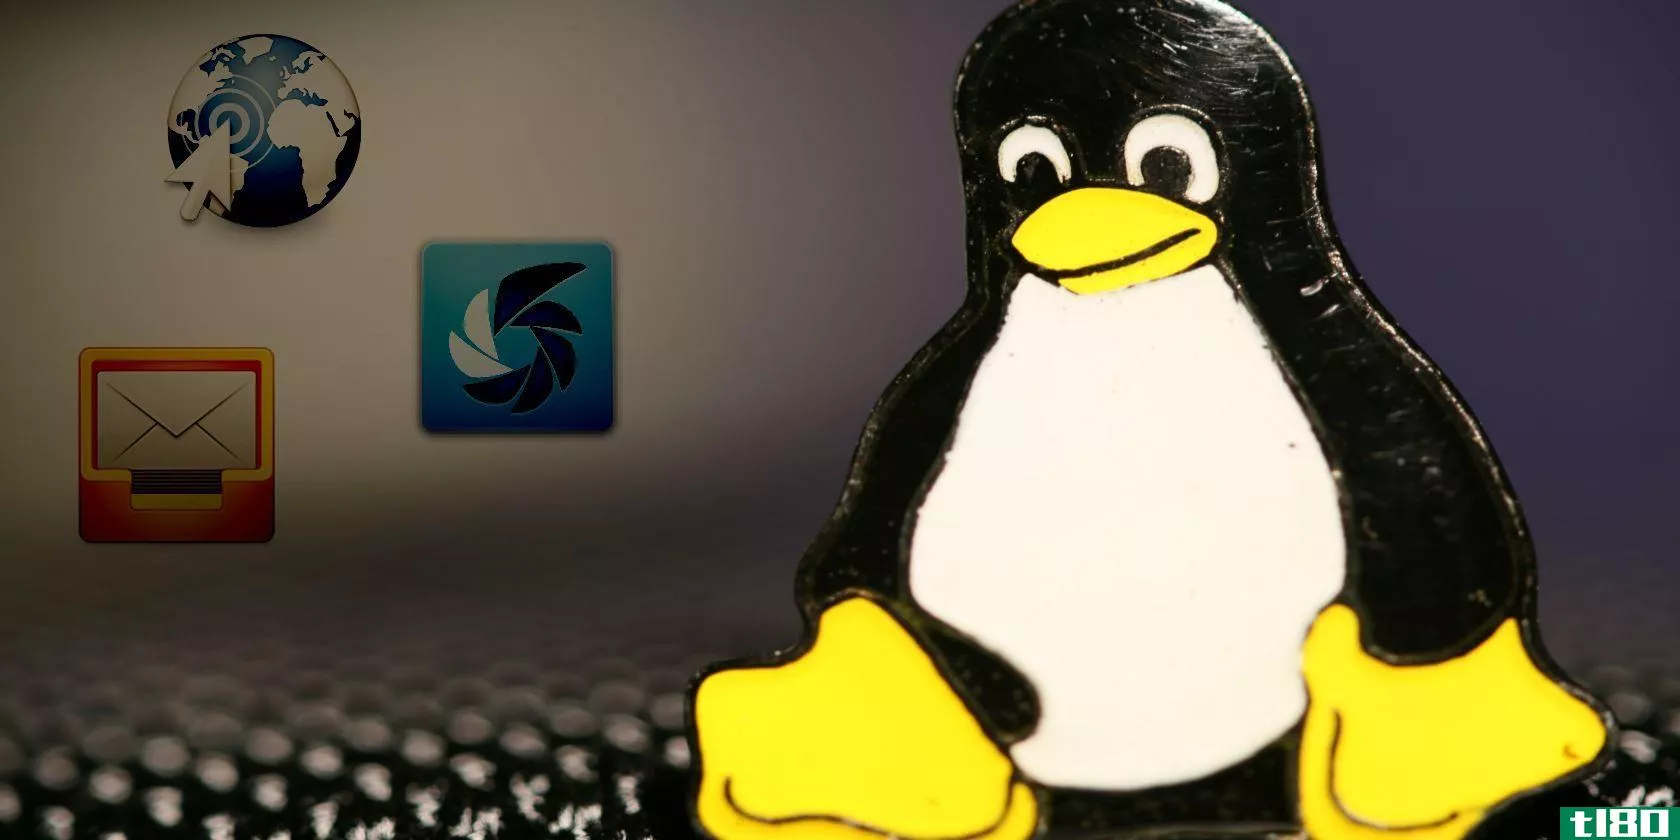 linux-apps-not-on-windows-featured